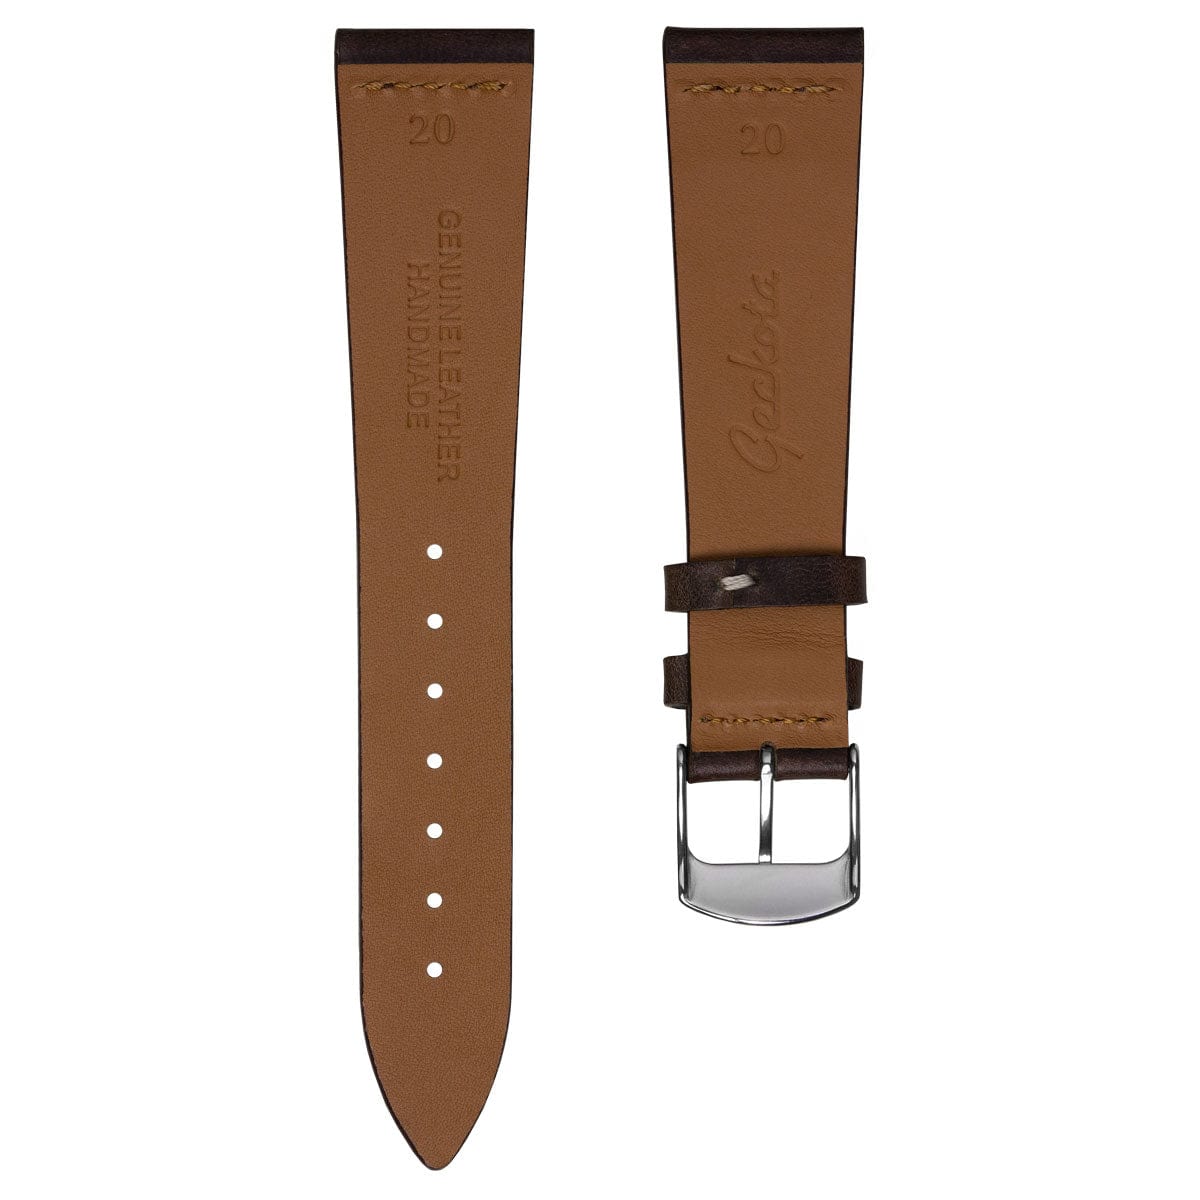 Clanville Vintage Horween Chromexcel Leather Dress Watch Strap - Chocolate Brown